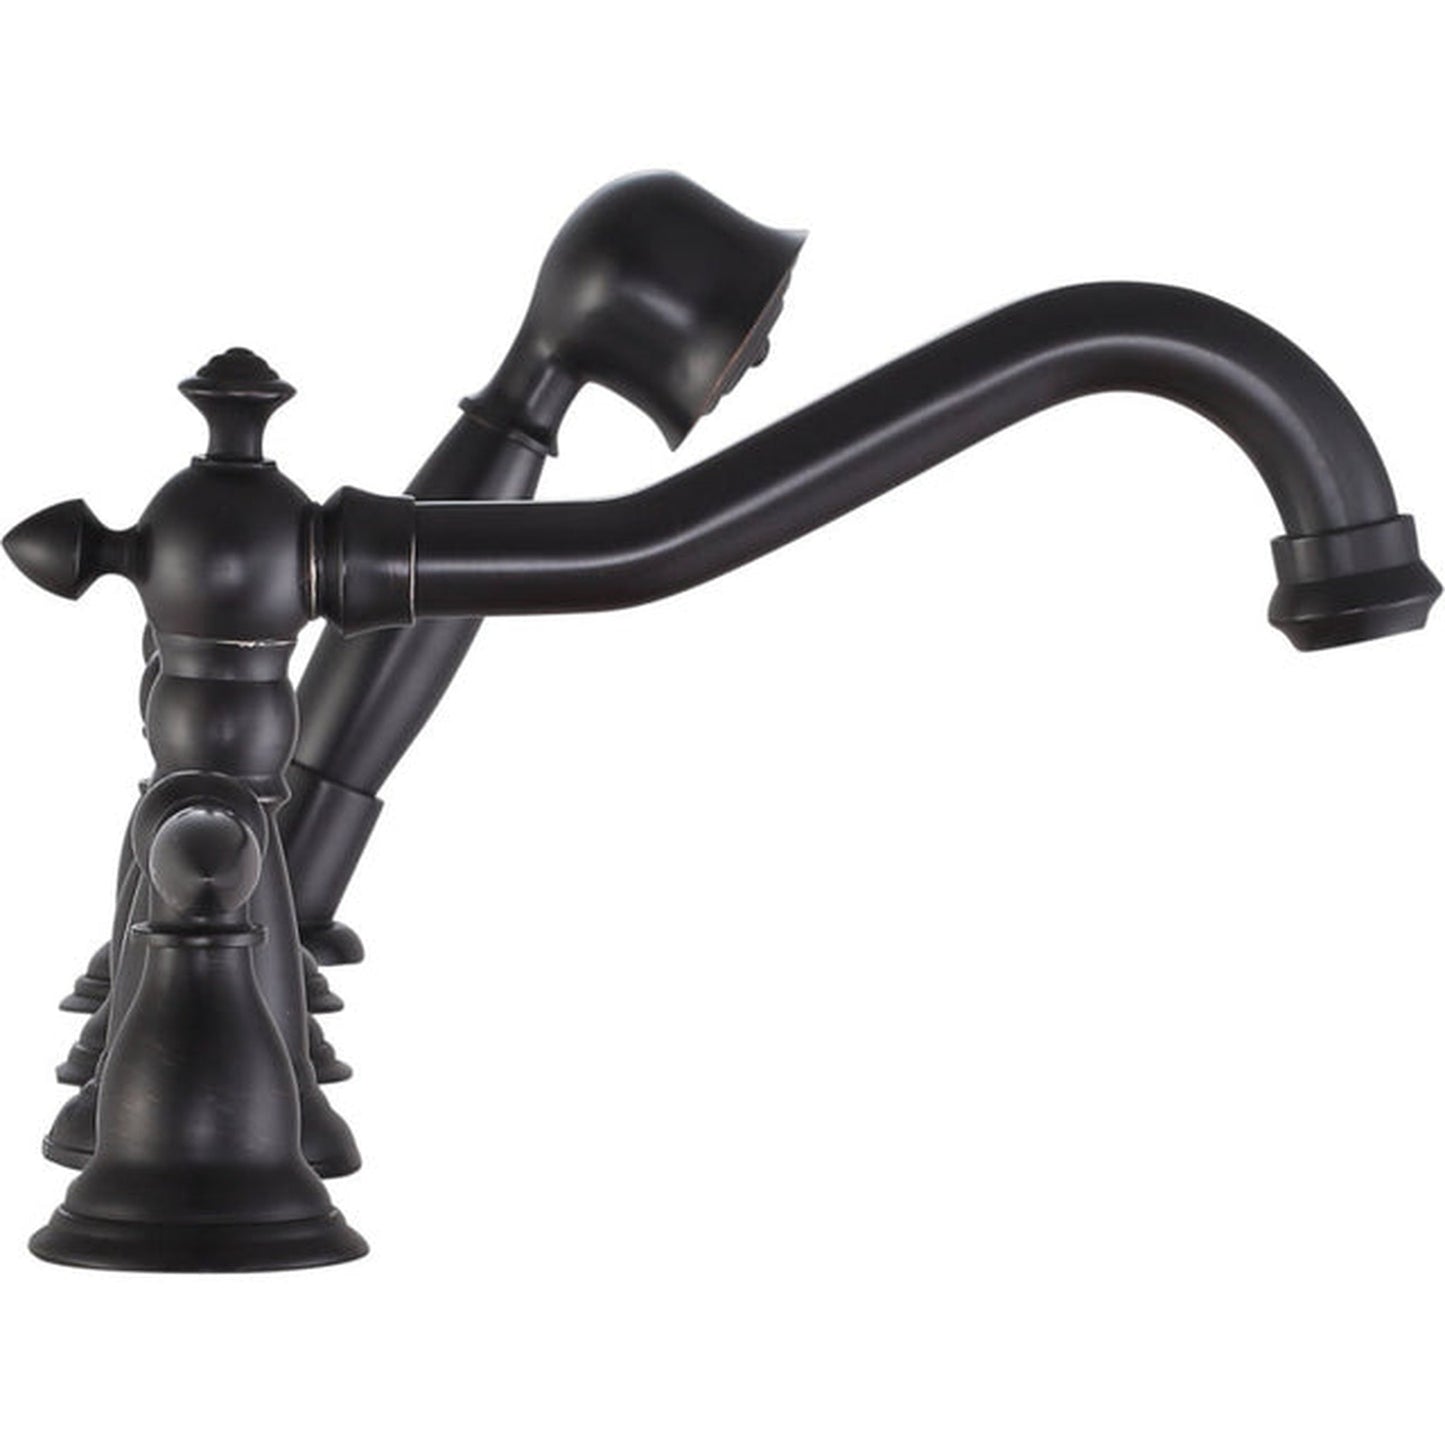 ANZZI Patriarch Series 3-Handle Oil Rubbed Bronze Roman Tub Faucet With Euro-Grip Handheld Sprayer